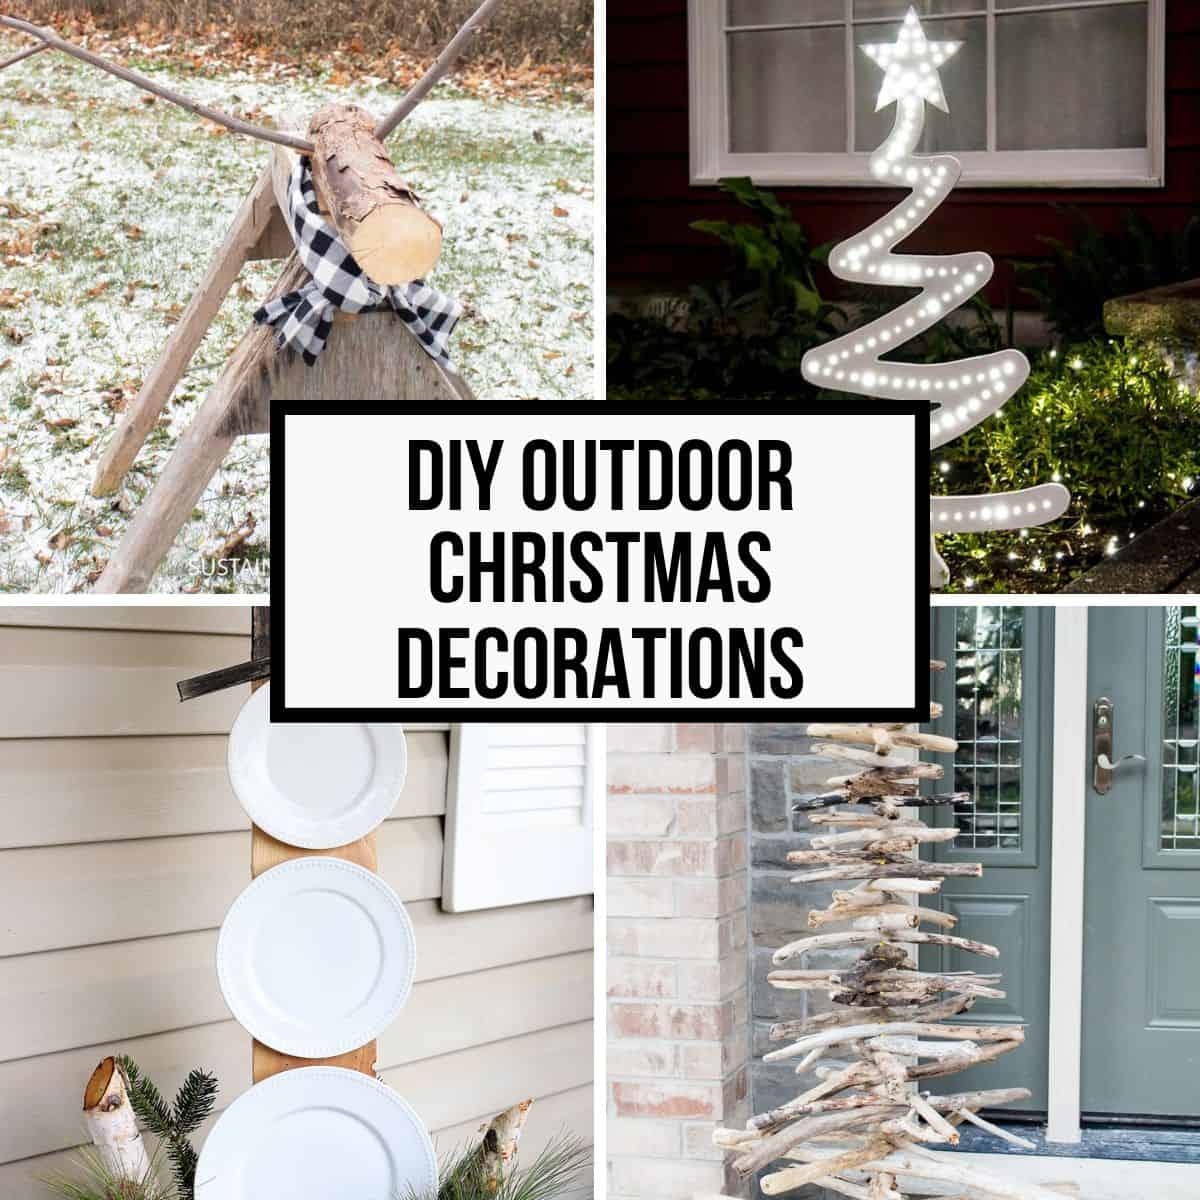 Image collage of four DIY outdoor decorations you can make